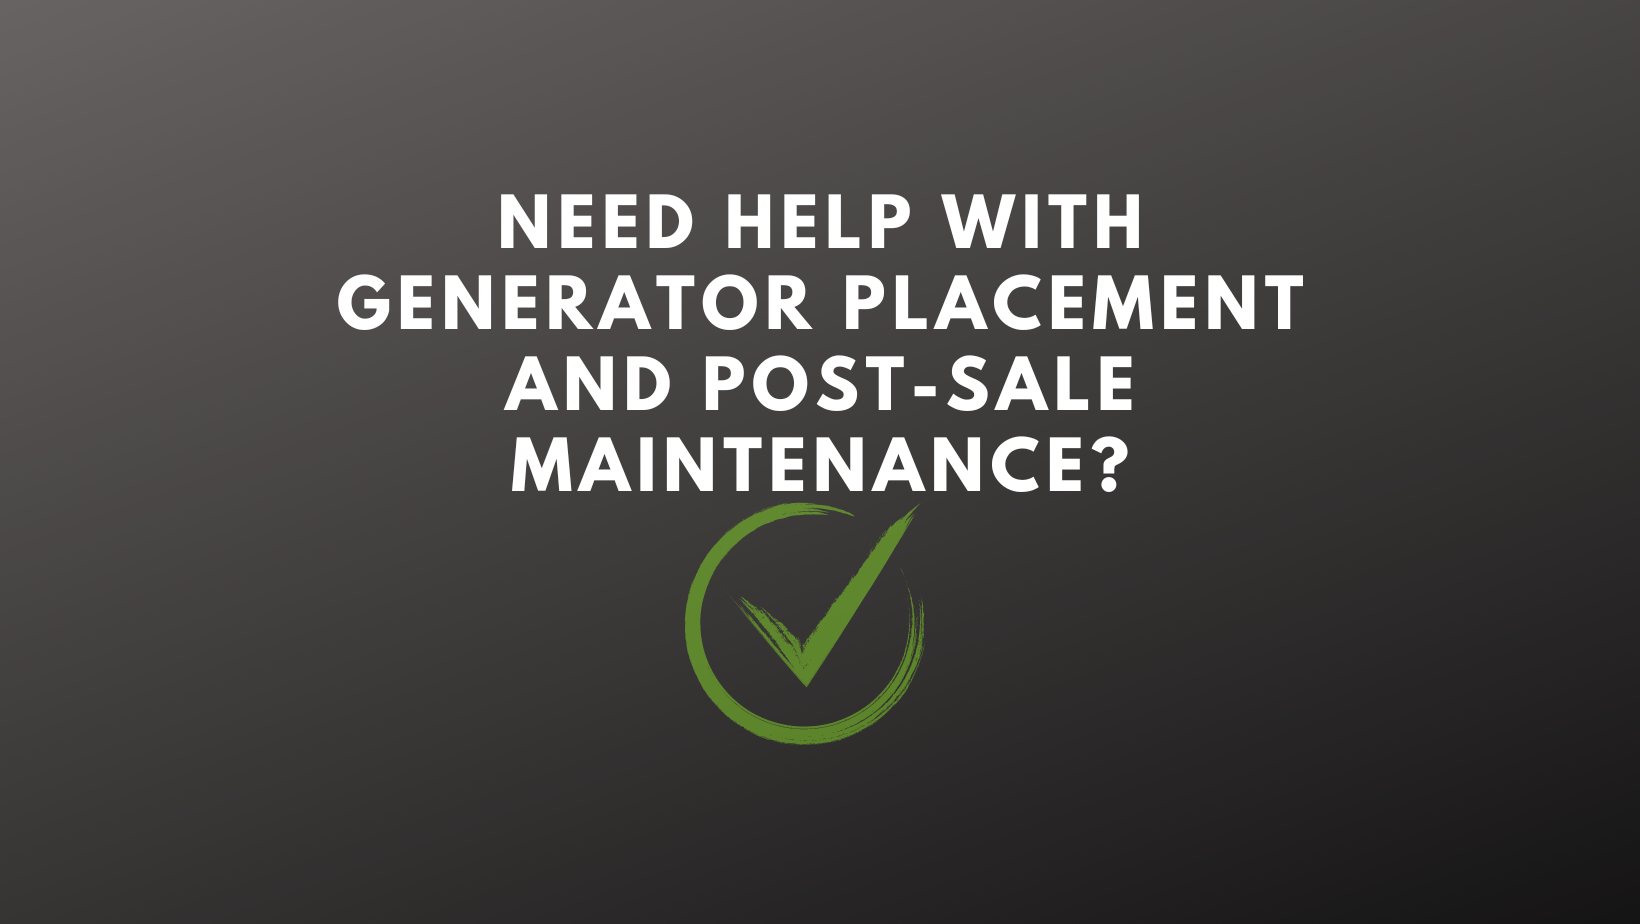 Need help with generator placement and post-sale maintenance?